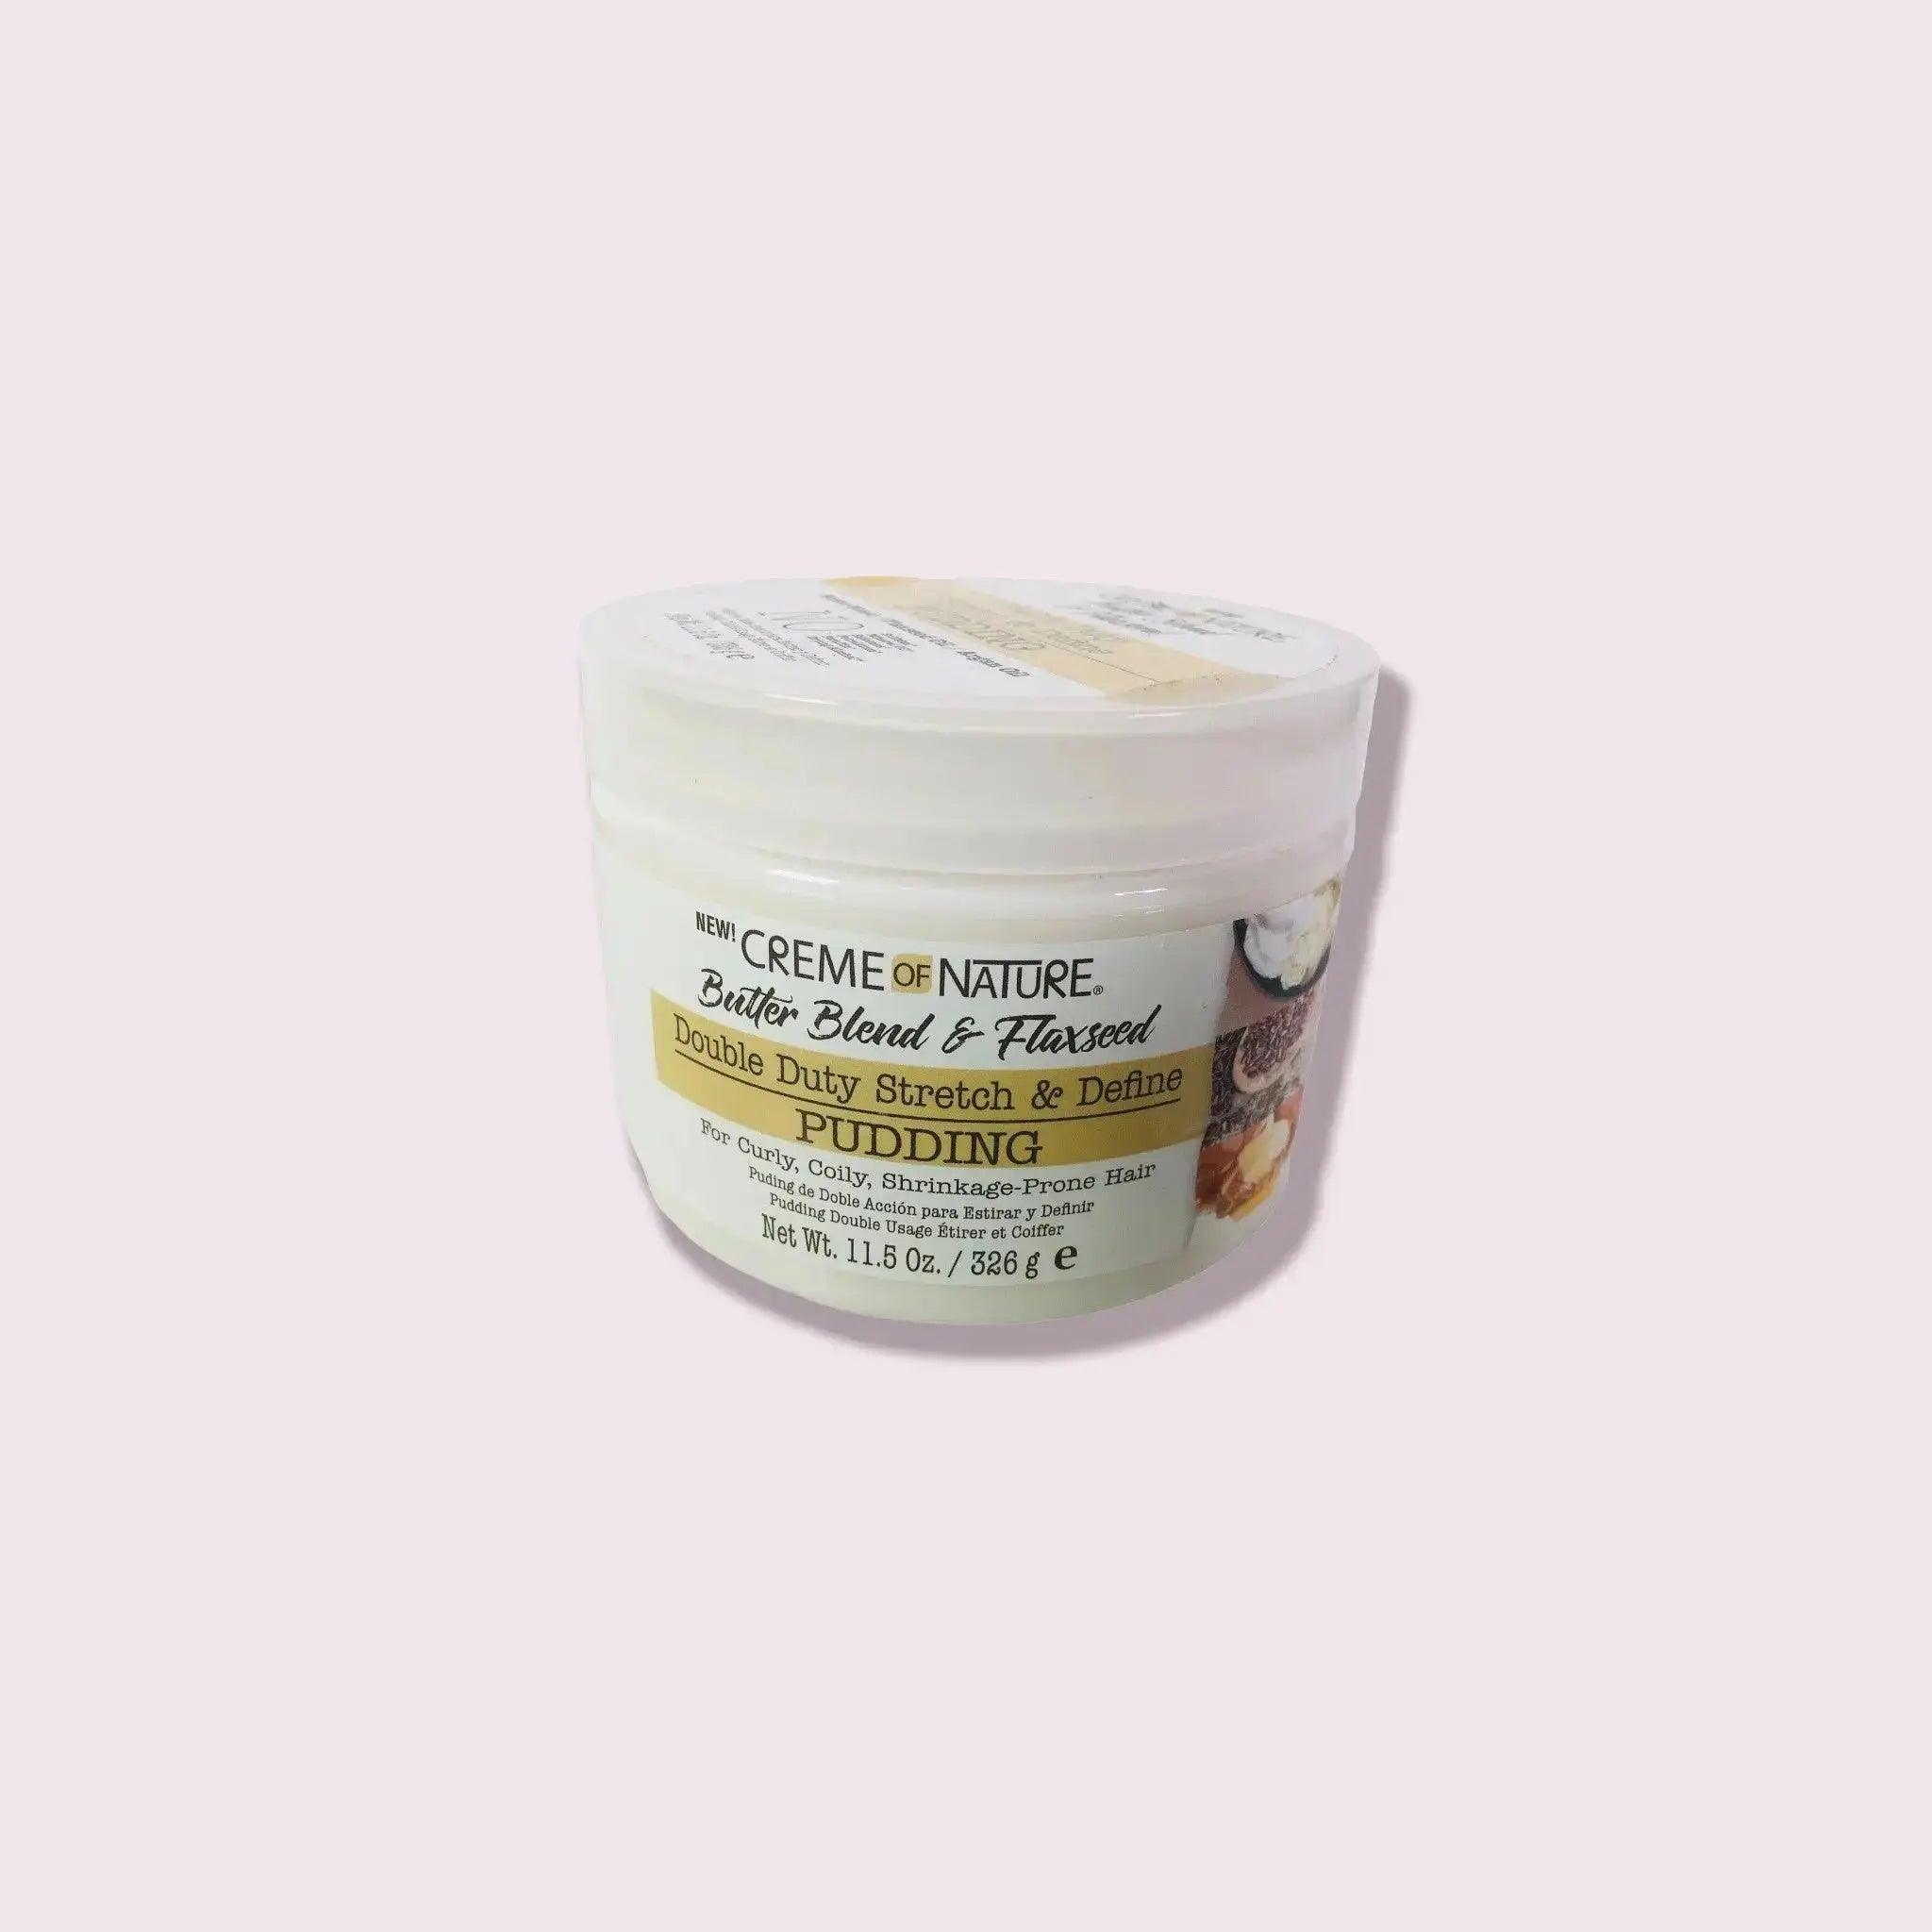 Creme of Nature Butter Blend & flaxseed Pudding 11.5oz - Honesty Sales U.K